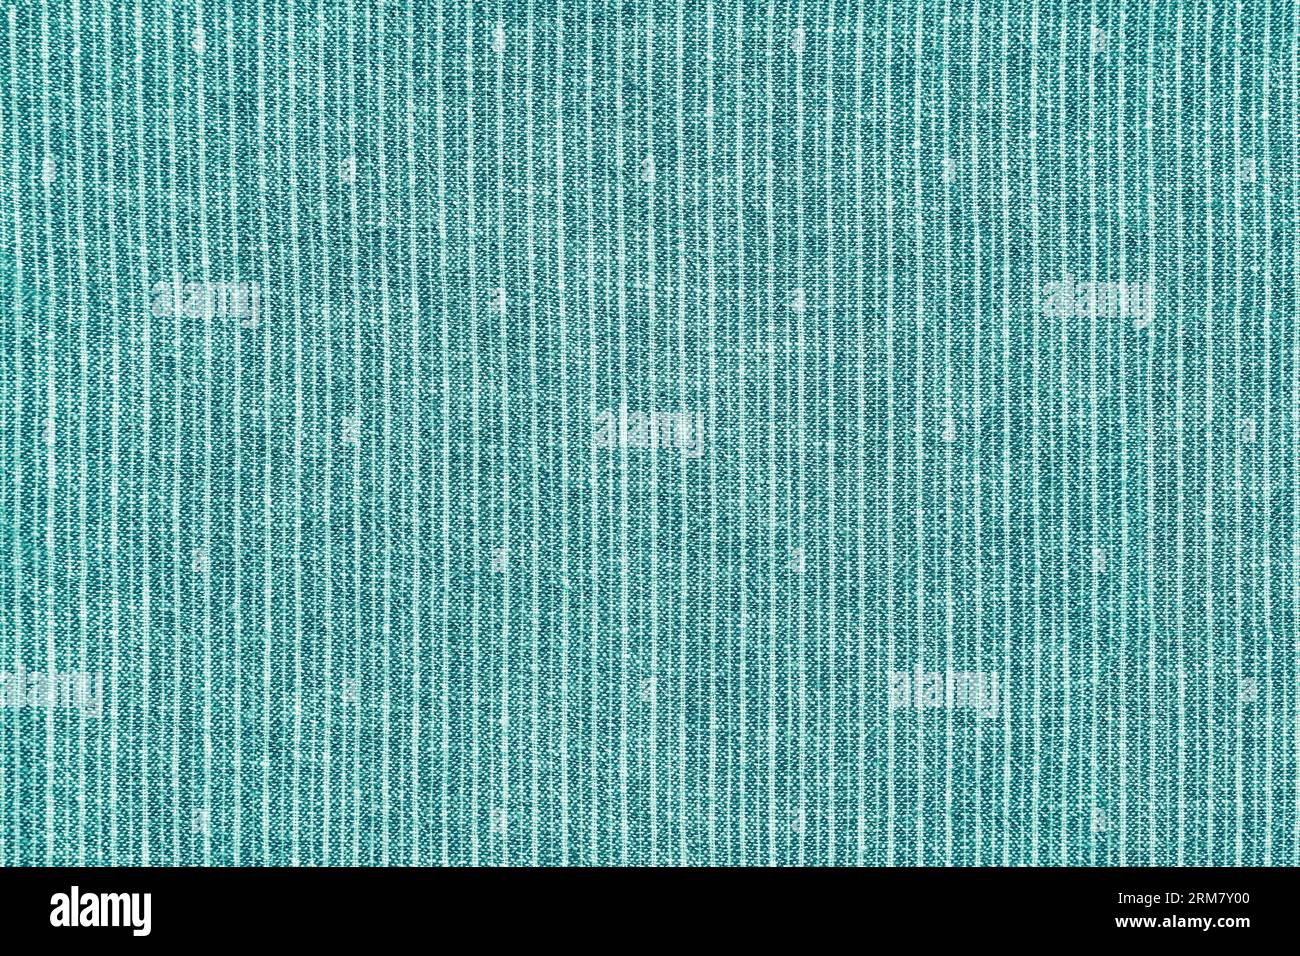 White cotton fabric texture. Clothes cotton jersey background with folds  Stock Photo